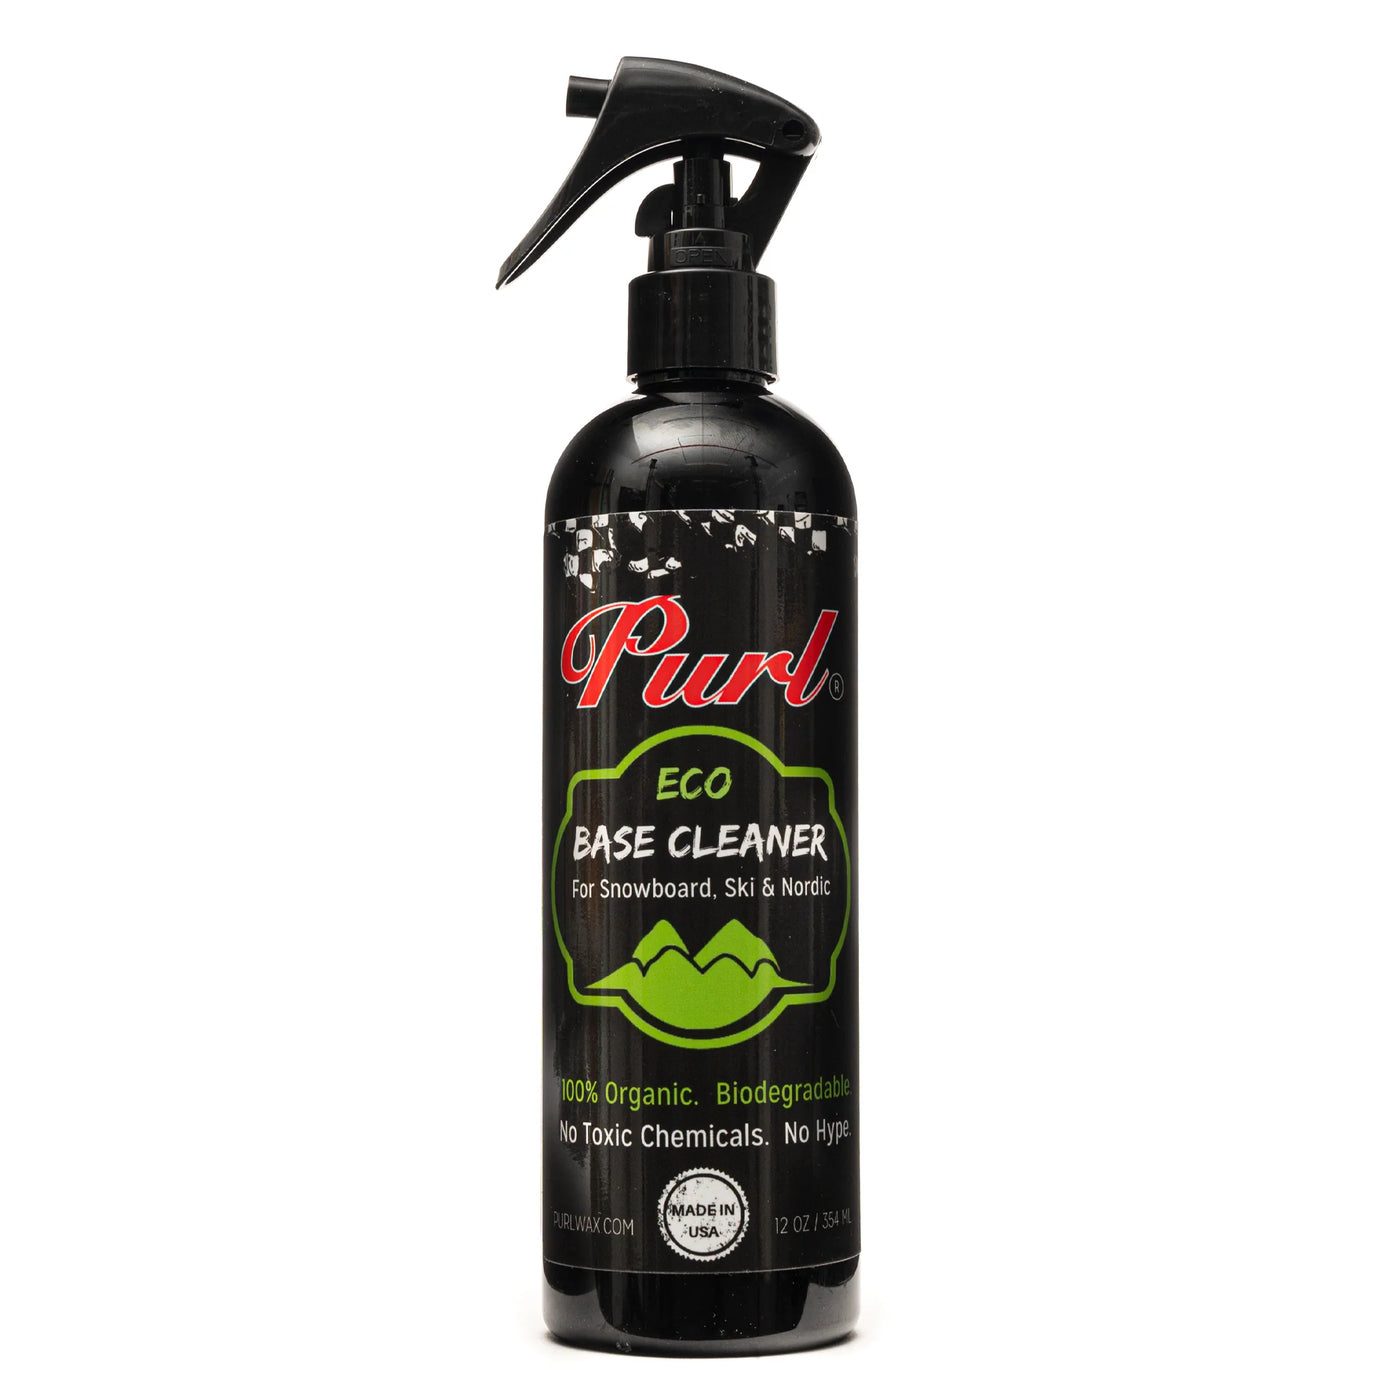 SNOWBOARD PURL Eco Base Cleaner